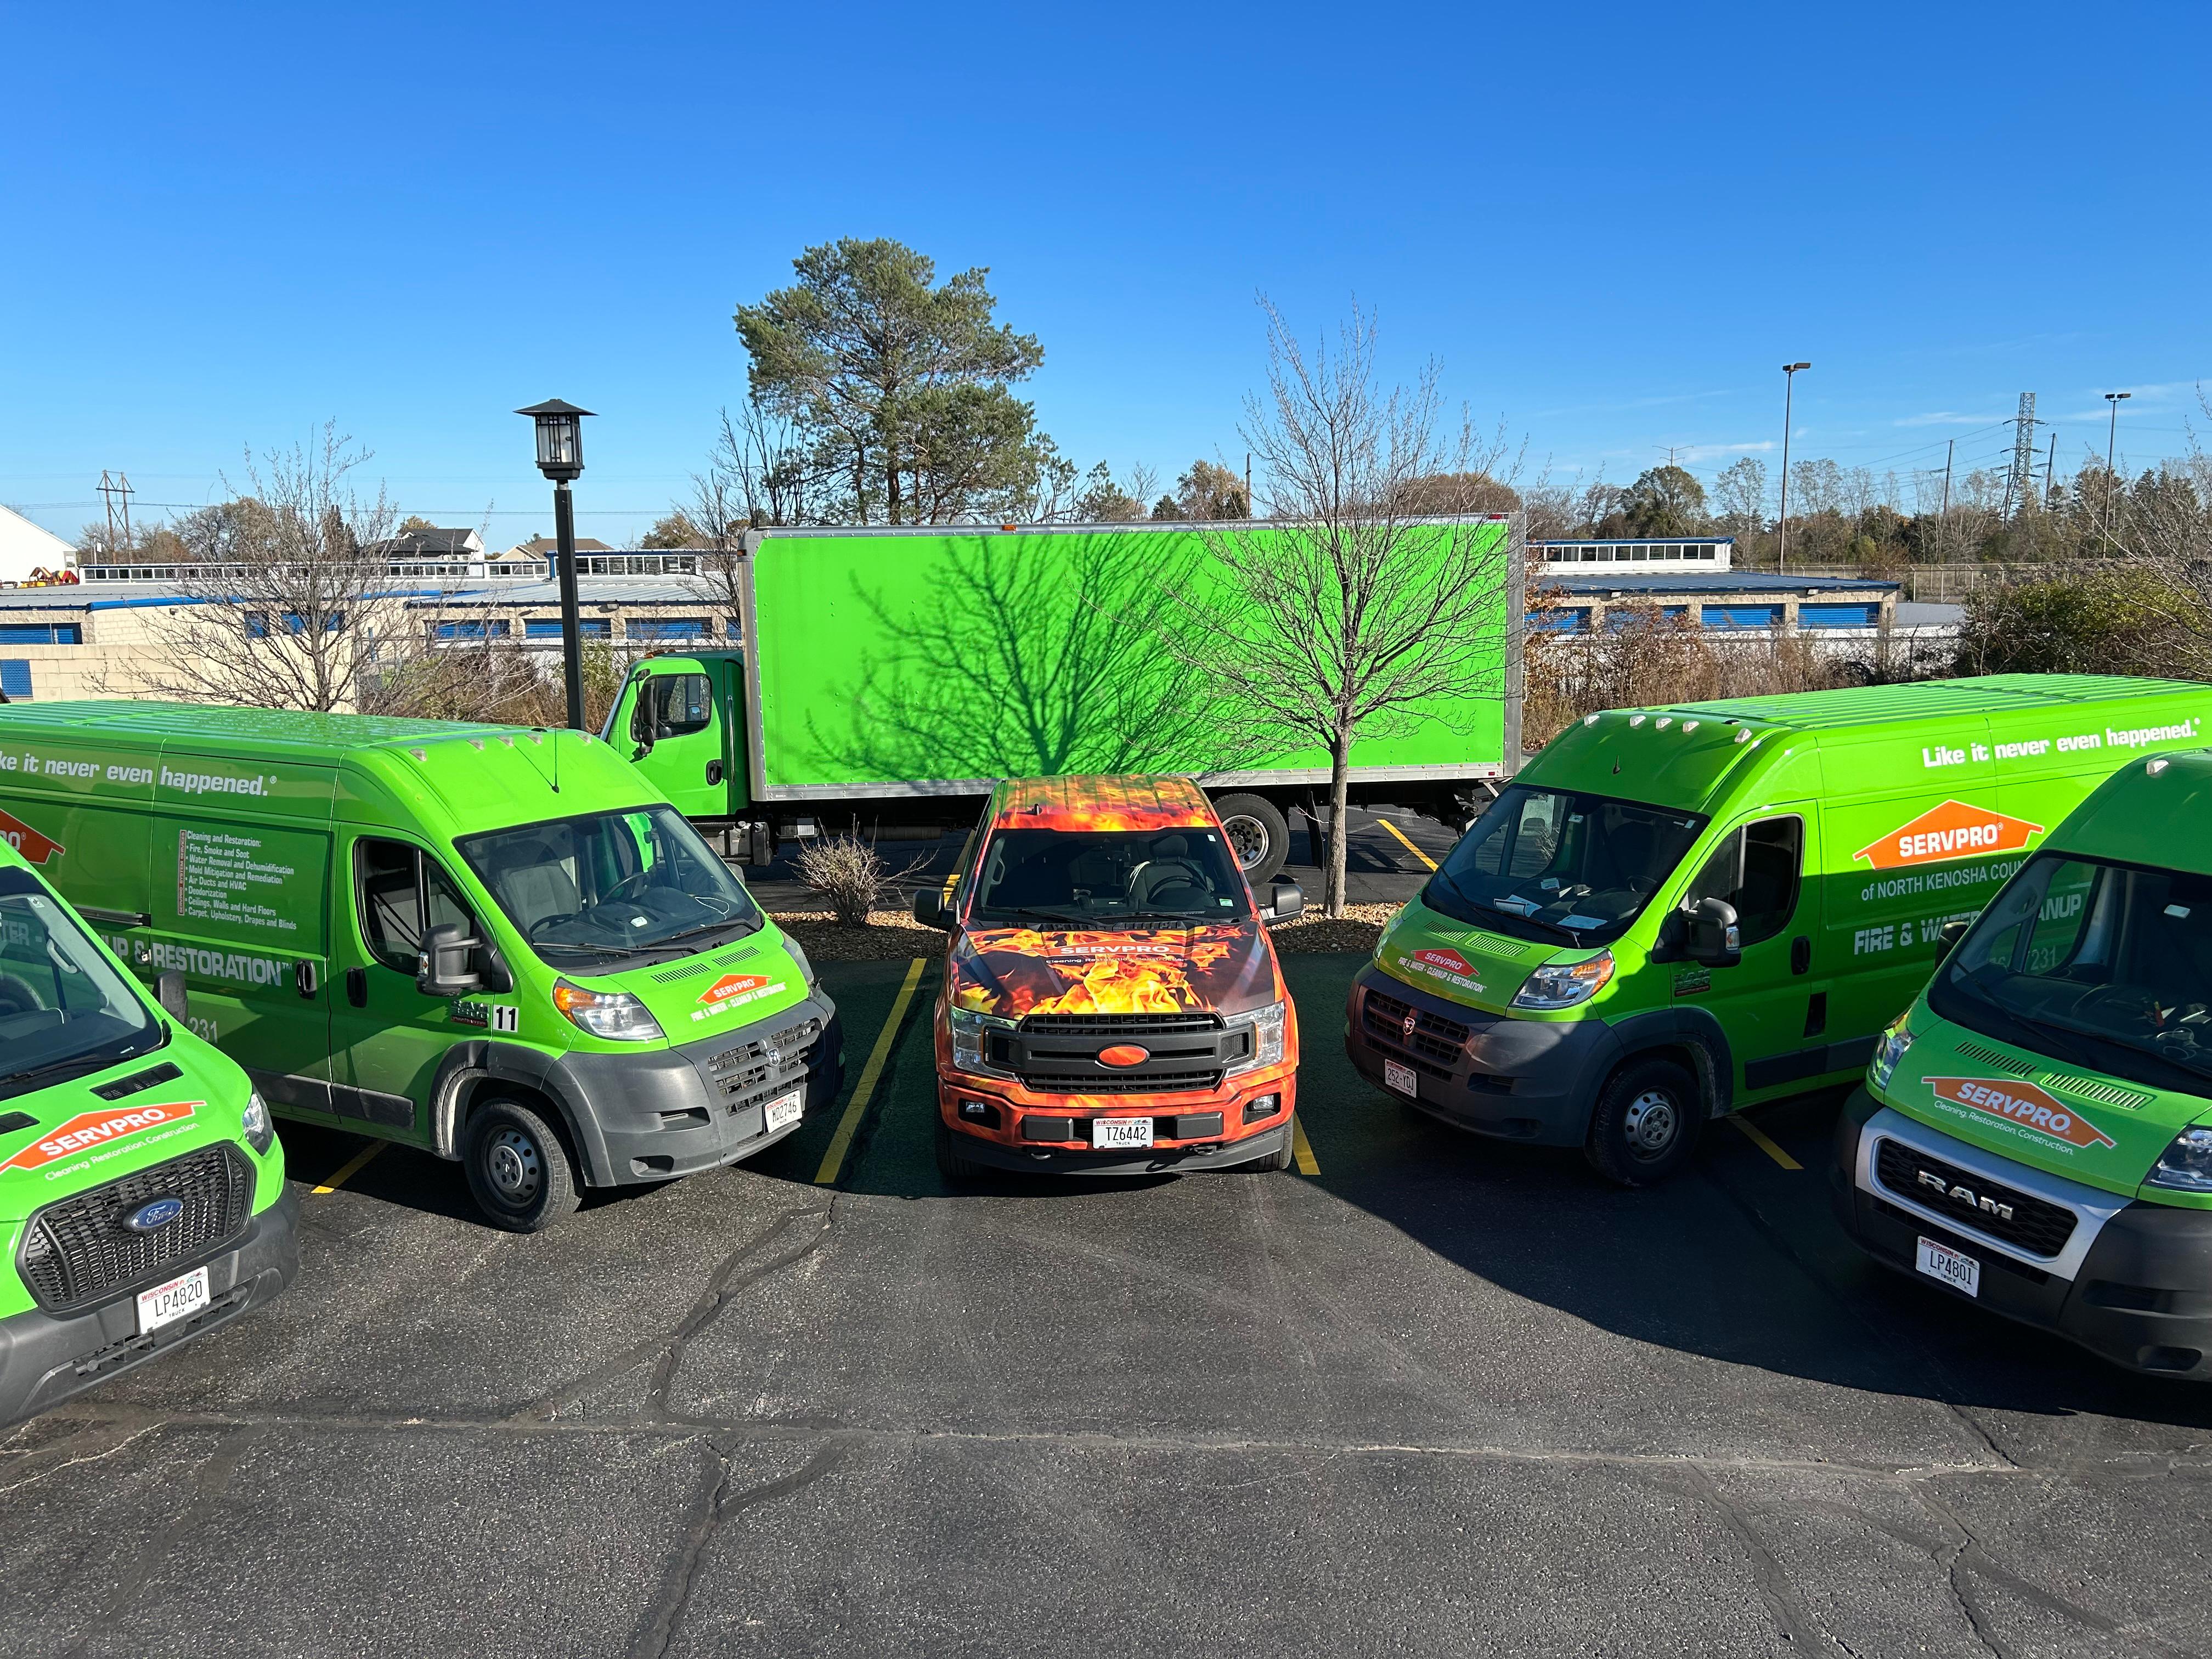 Showing 6 SERVPRO vehicles side by side